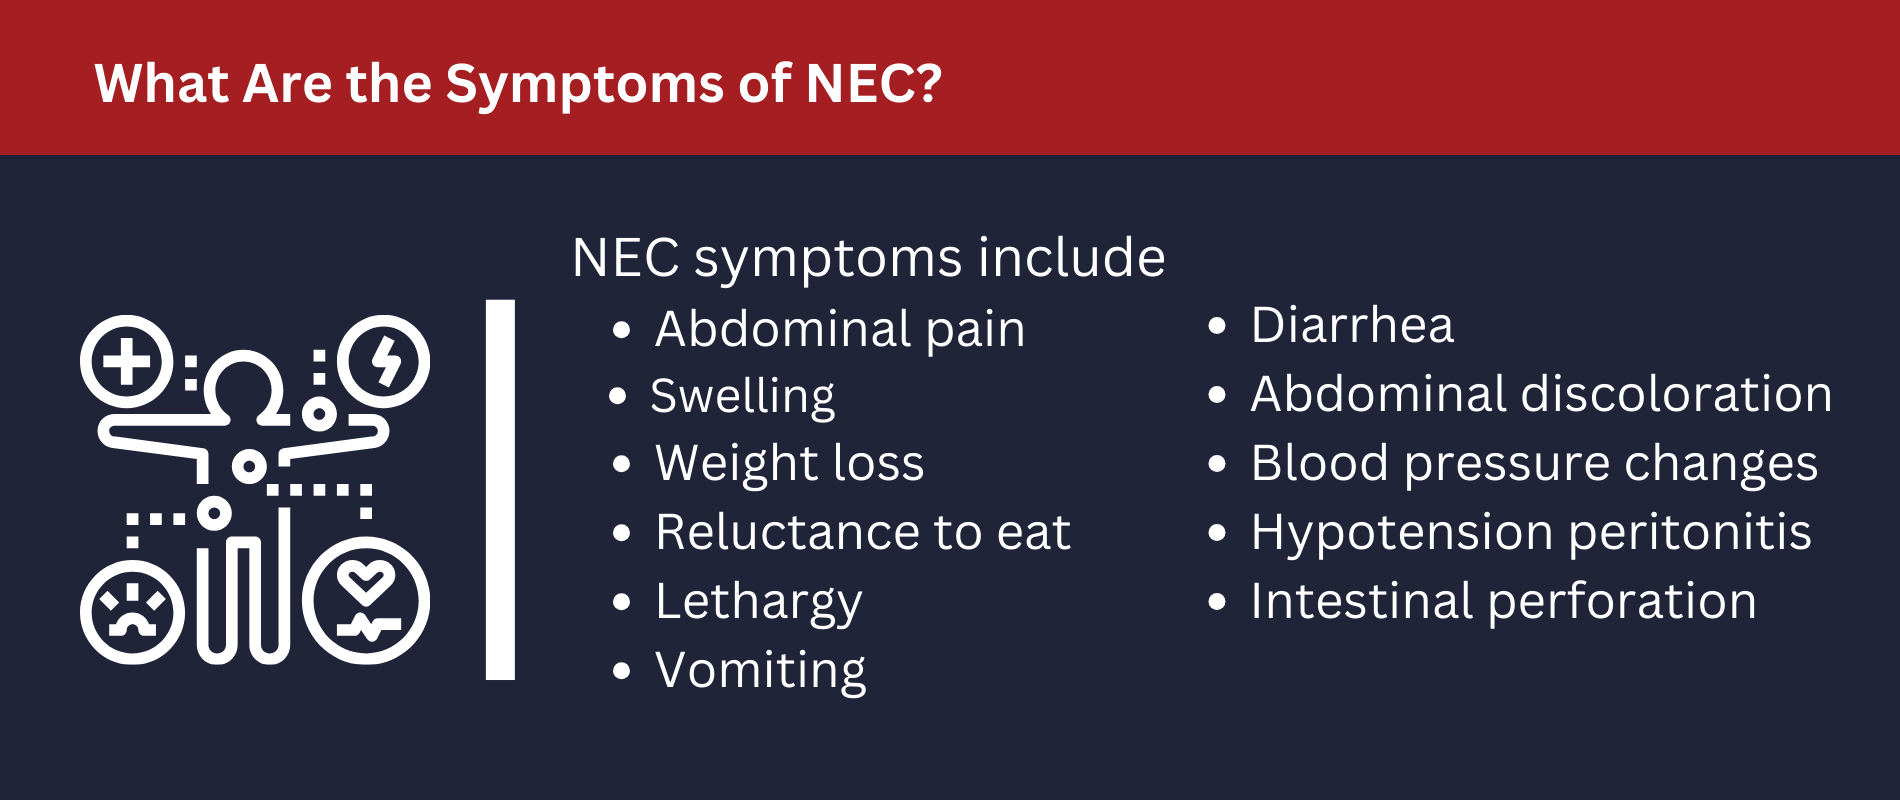 NEC symptoms include abdominal pain, swelling, weight loss, reluctance to eat and more.